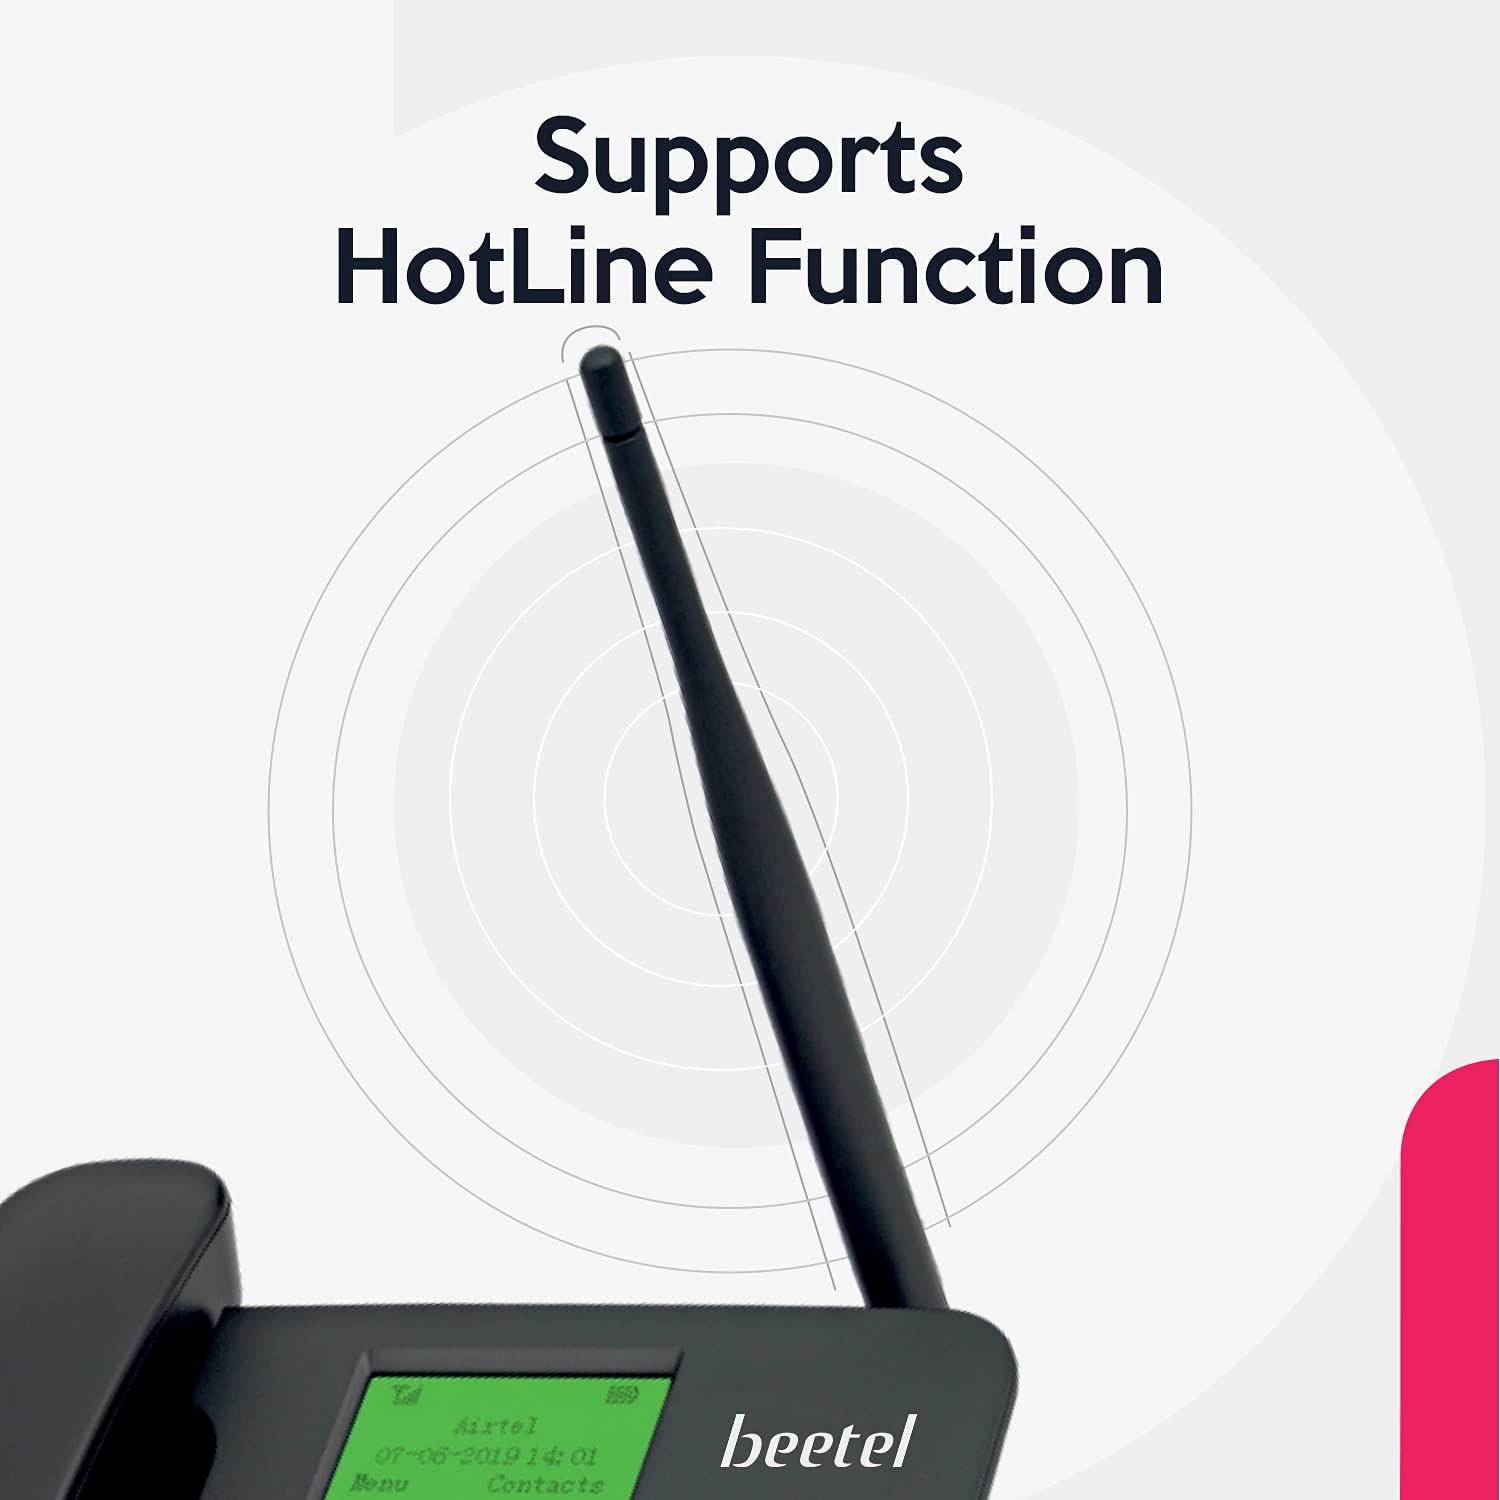 Beetel F1K GSM Fixed Wireless Phone, Support Quad band 2G,LCD Display,Speed Dial,Two way Speaker phone & Adjustable Volume,Supports Hotline Function,Alarm,4 Direct Memory Keys,Basic Calculator (Black) - Mahajan Electronics Online